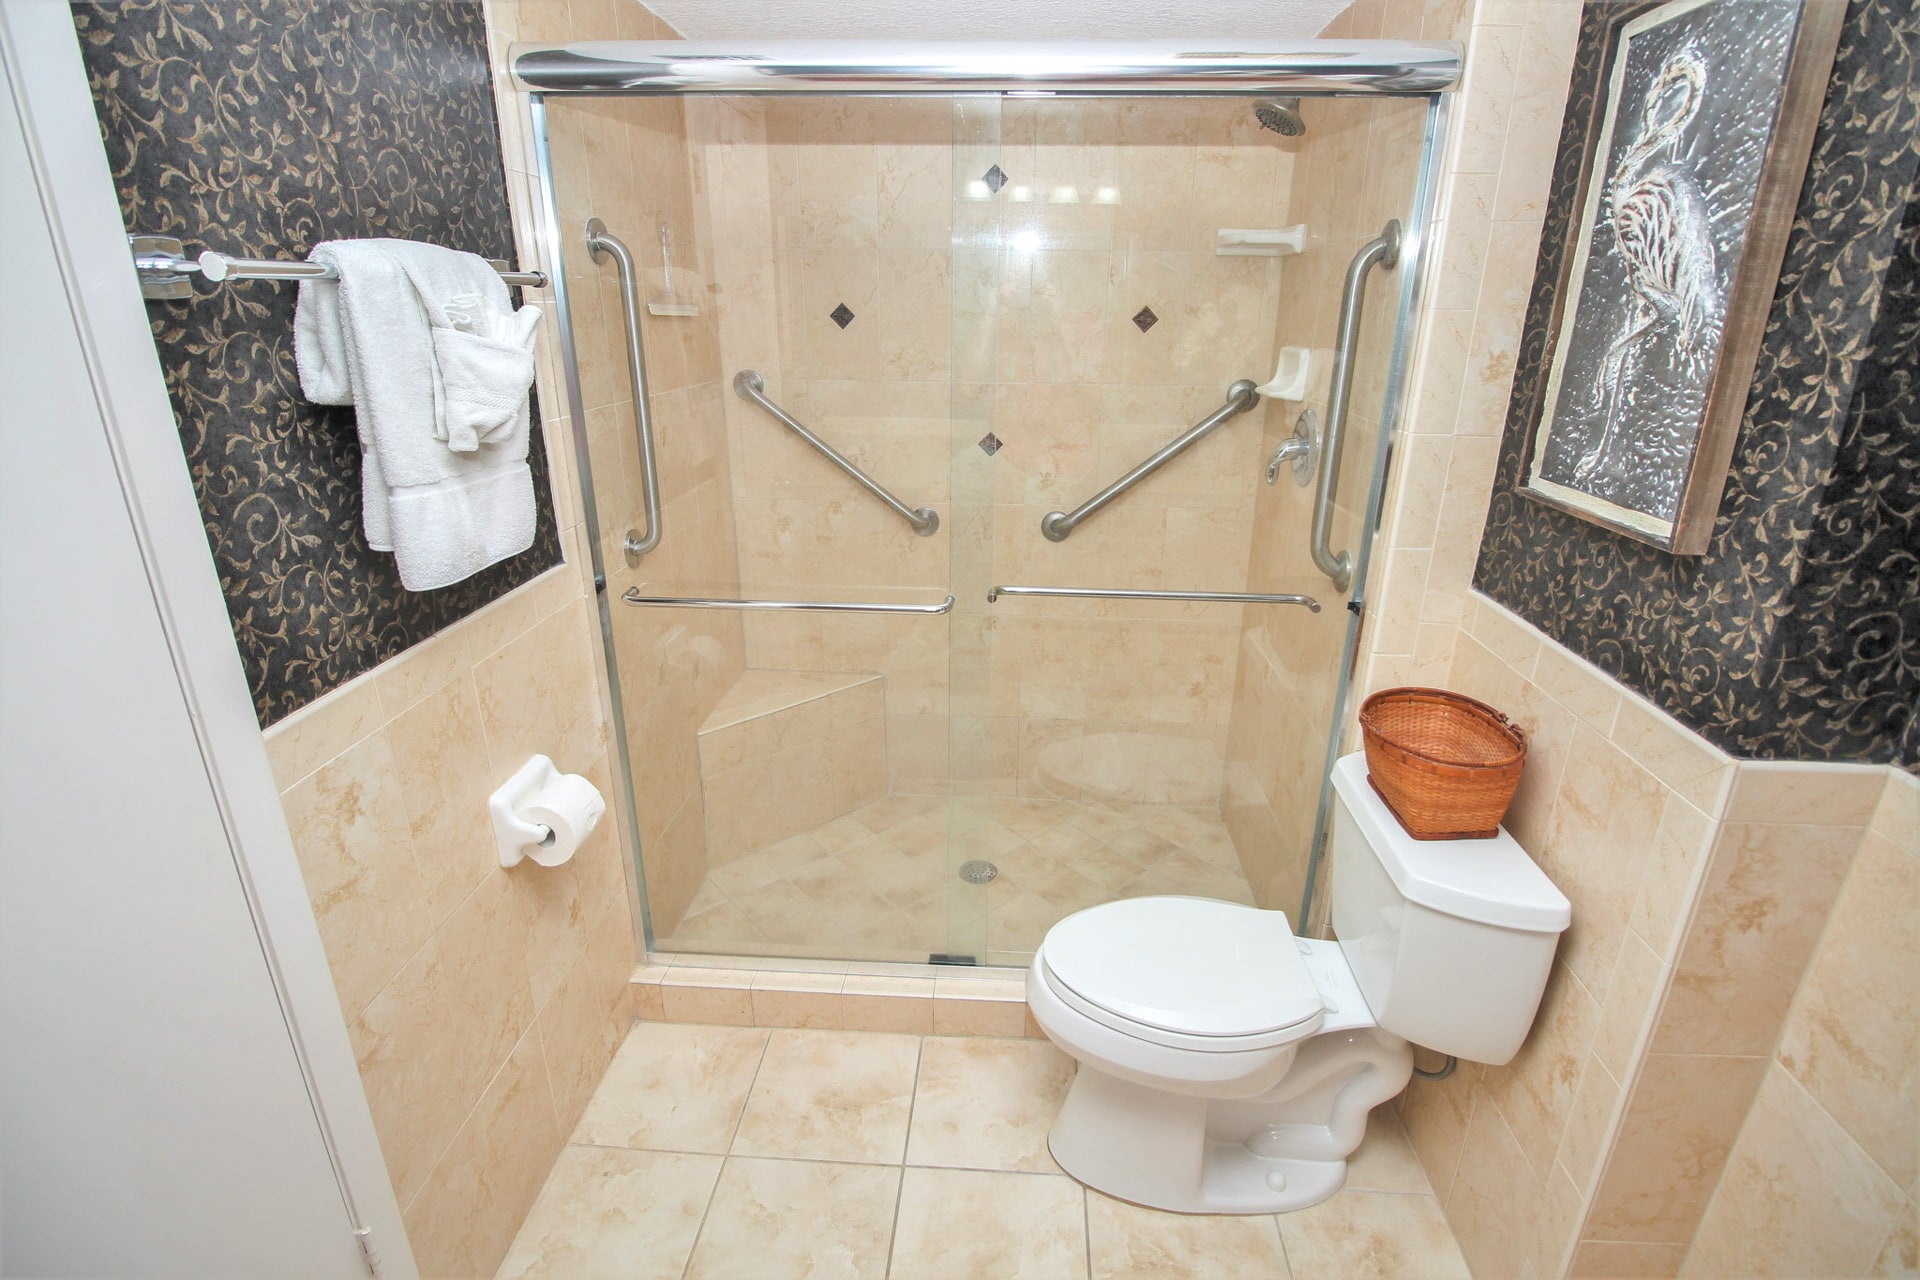 Shower with grab bars